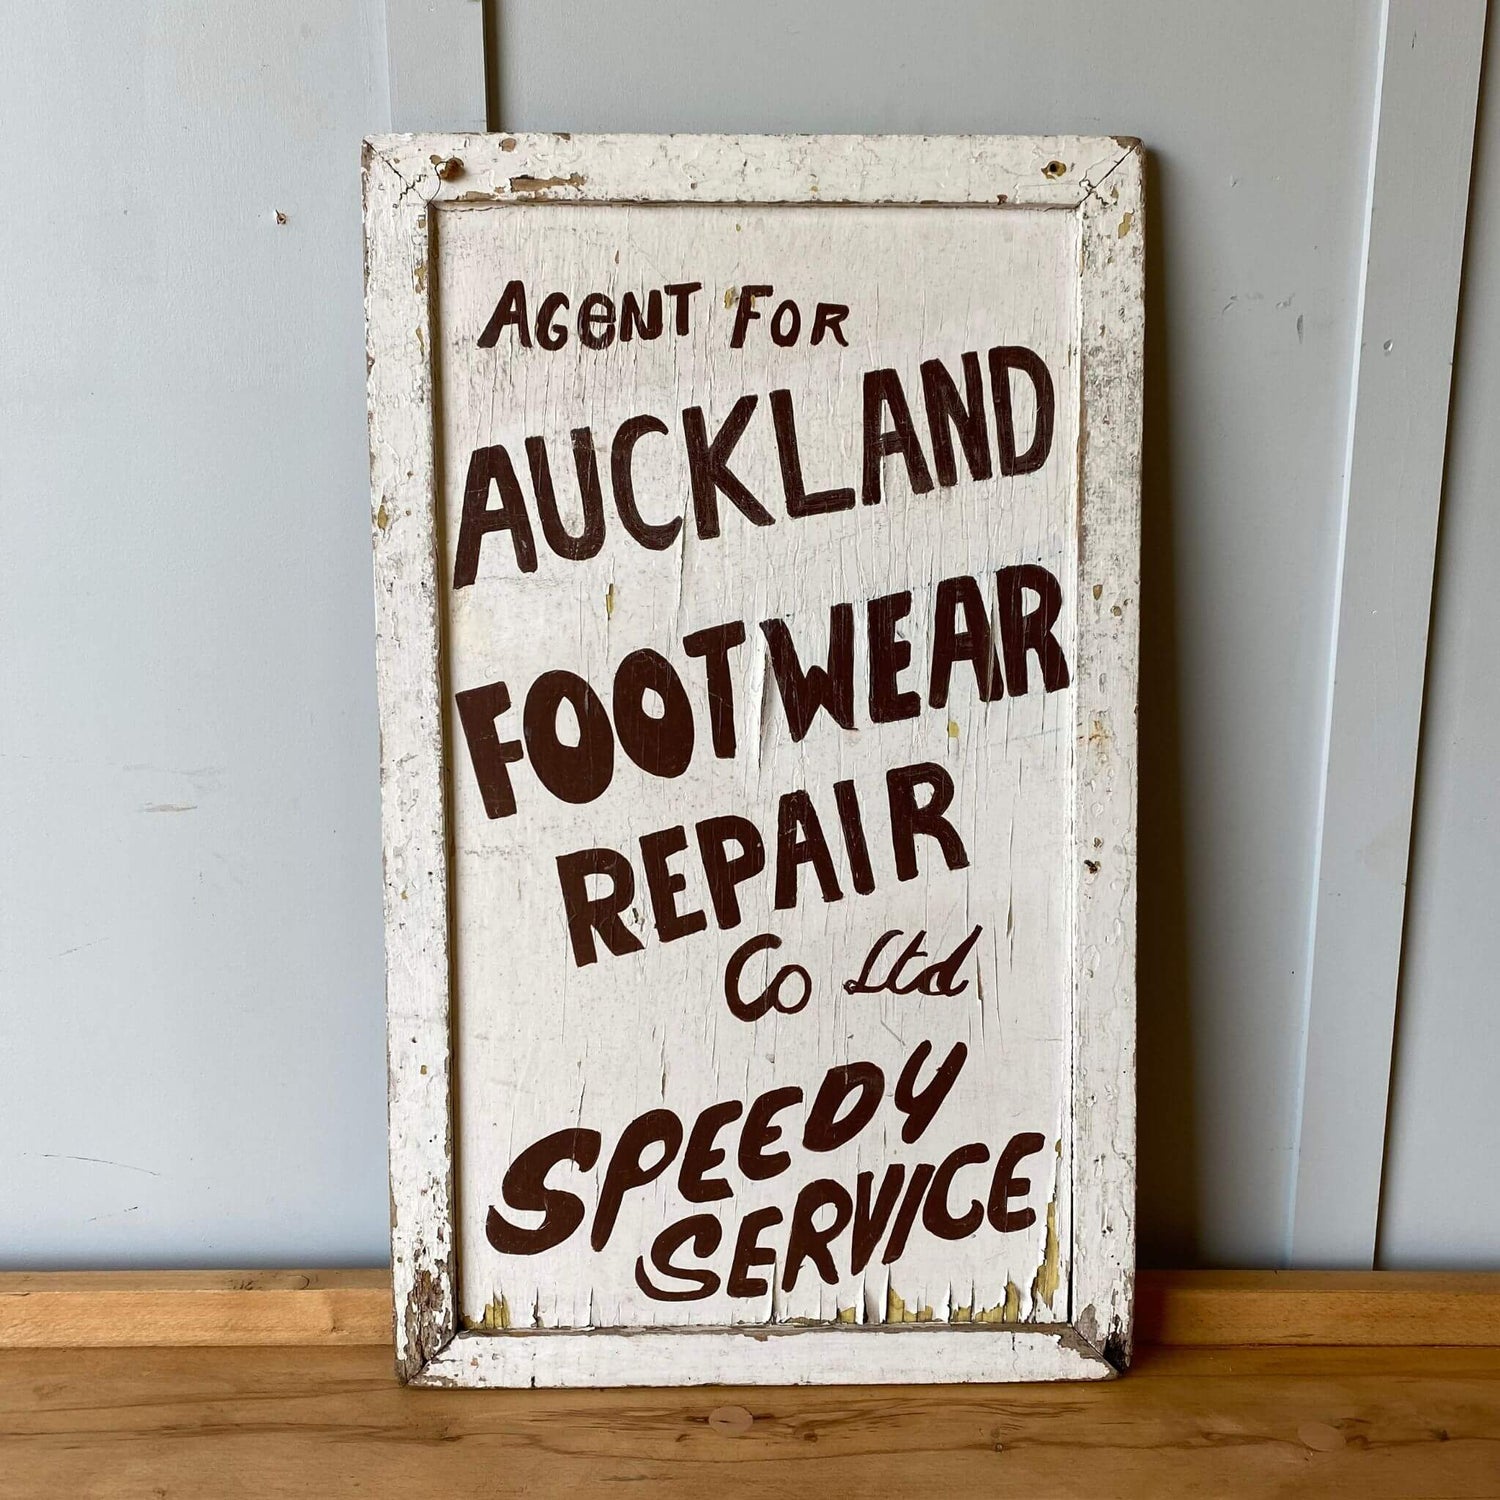 Collectible advertising sign